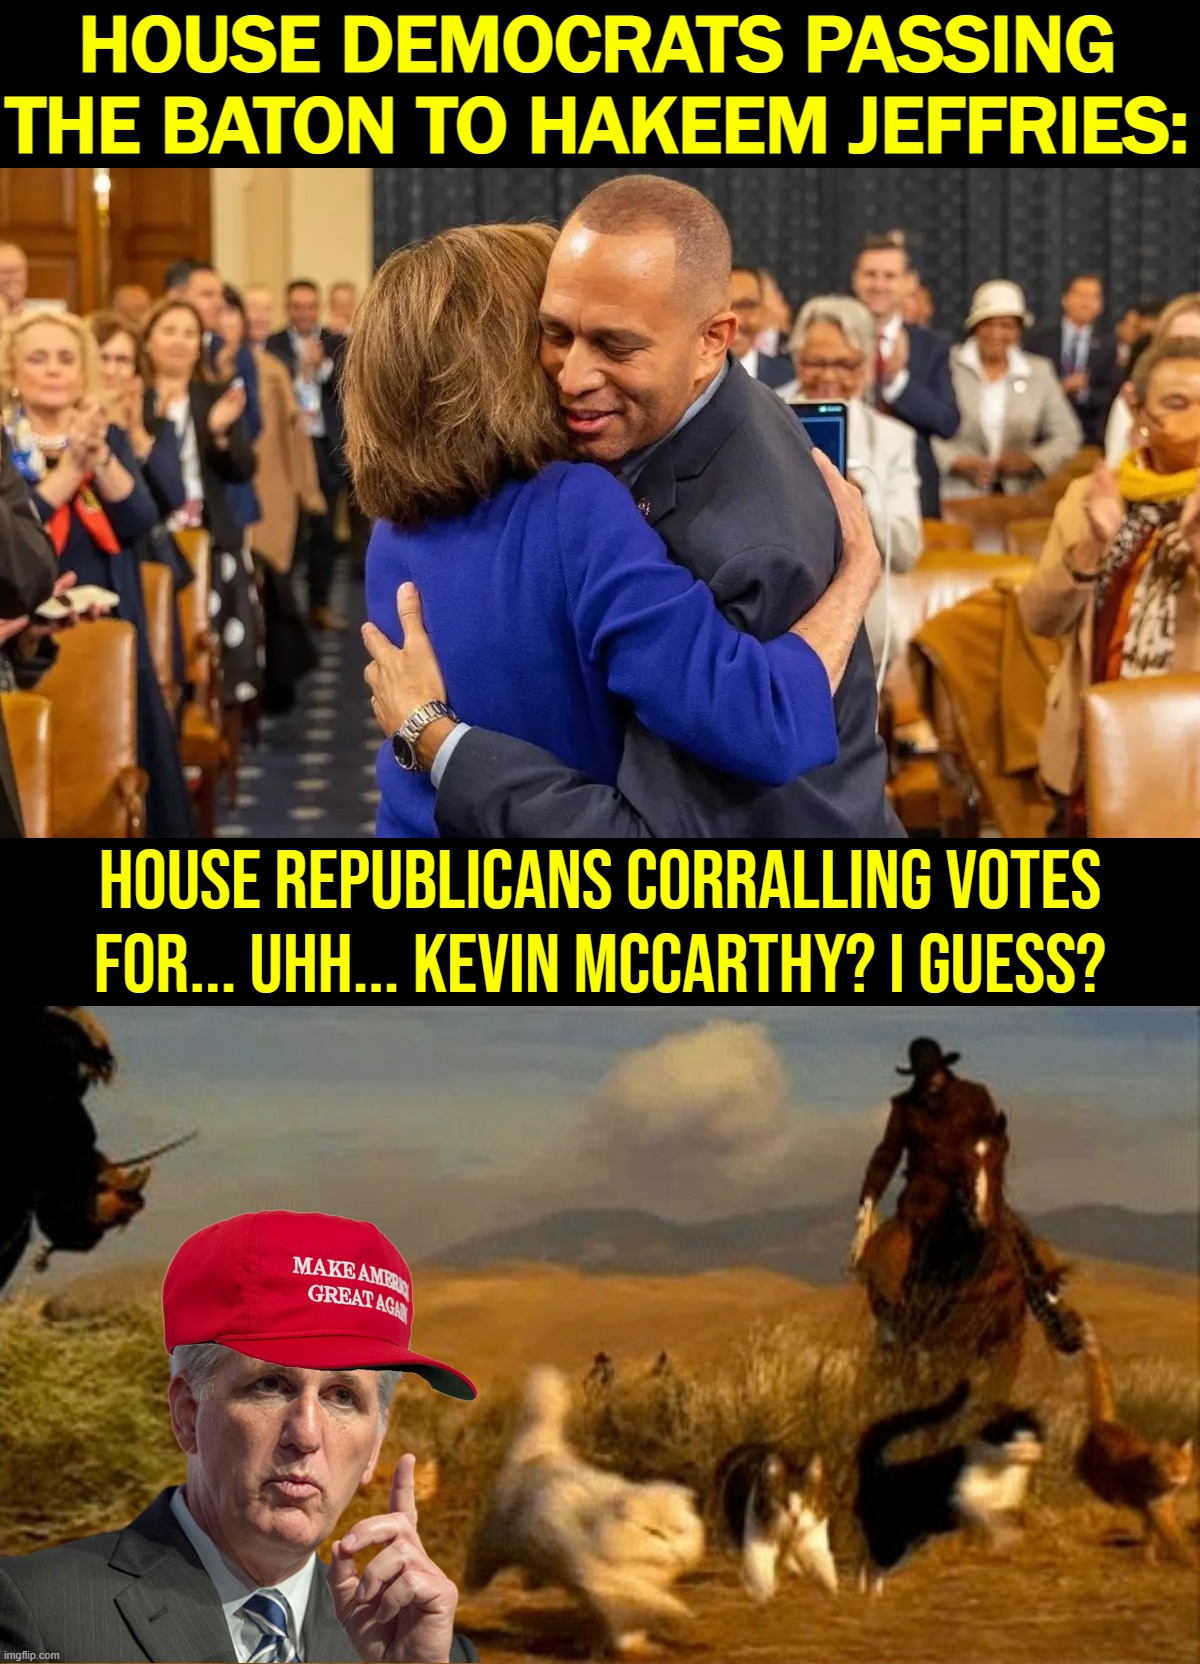 Republicans in disarray! | HOUSE DEMOCRATS PASSING THE BATON TO HAKEEM JEFFRIES:; House Republicans corralling votes for... uhh... Kevin McCarthy? I guess? | image tagged in hakeem jeffries and nancy pelosi,herding cats,democrats,republicans,gop,republican party | made w/ Imgflip meme maker